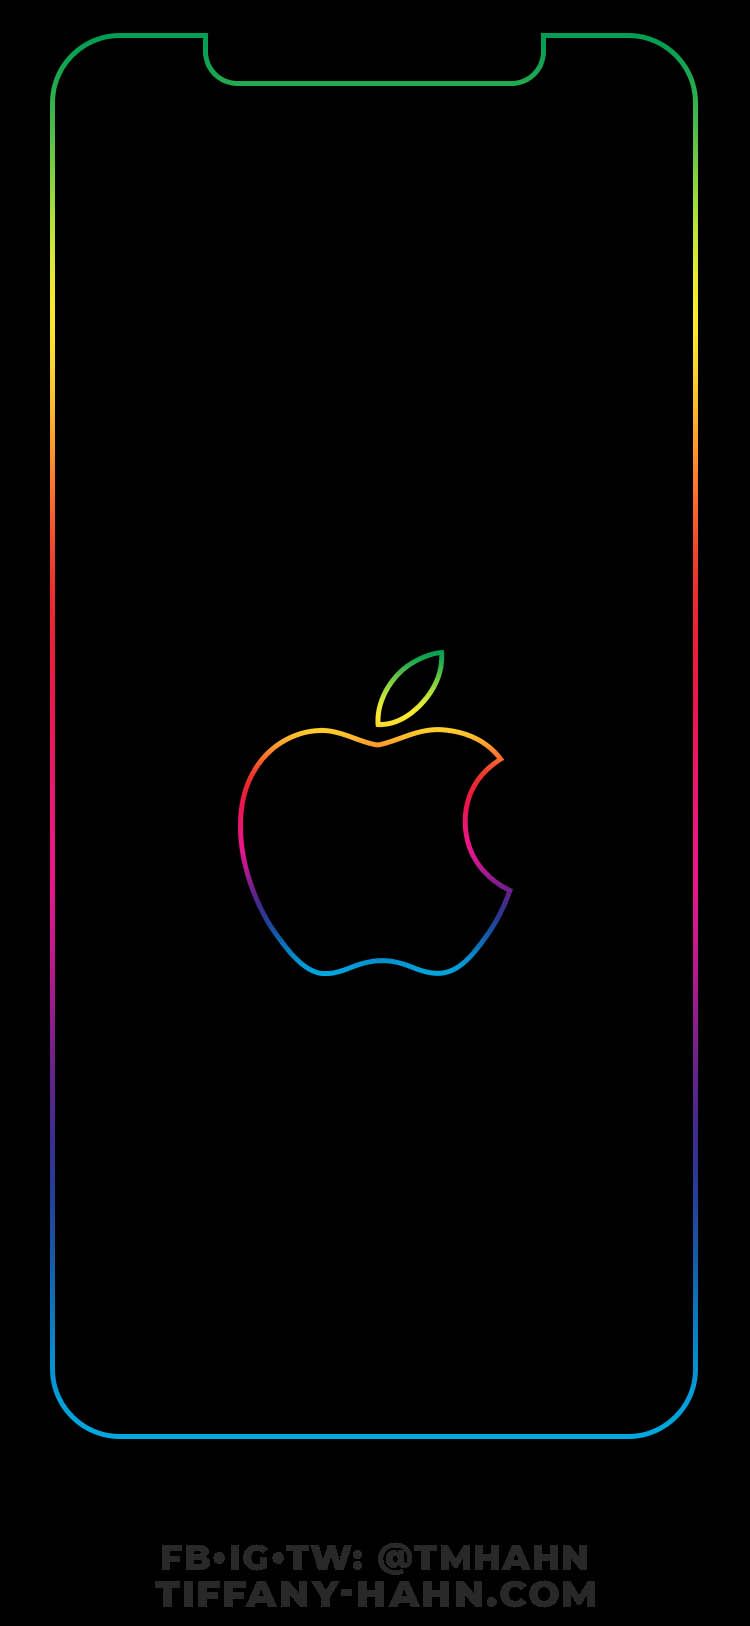 iPhone XS Max Wallpaper Outline Screen. Apple logo wallpaper iphone, Apple logo wallpaper, Apple wallpaper iphone